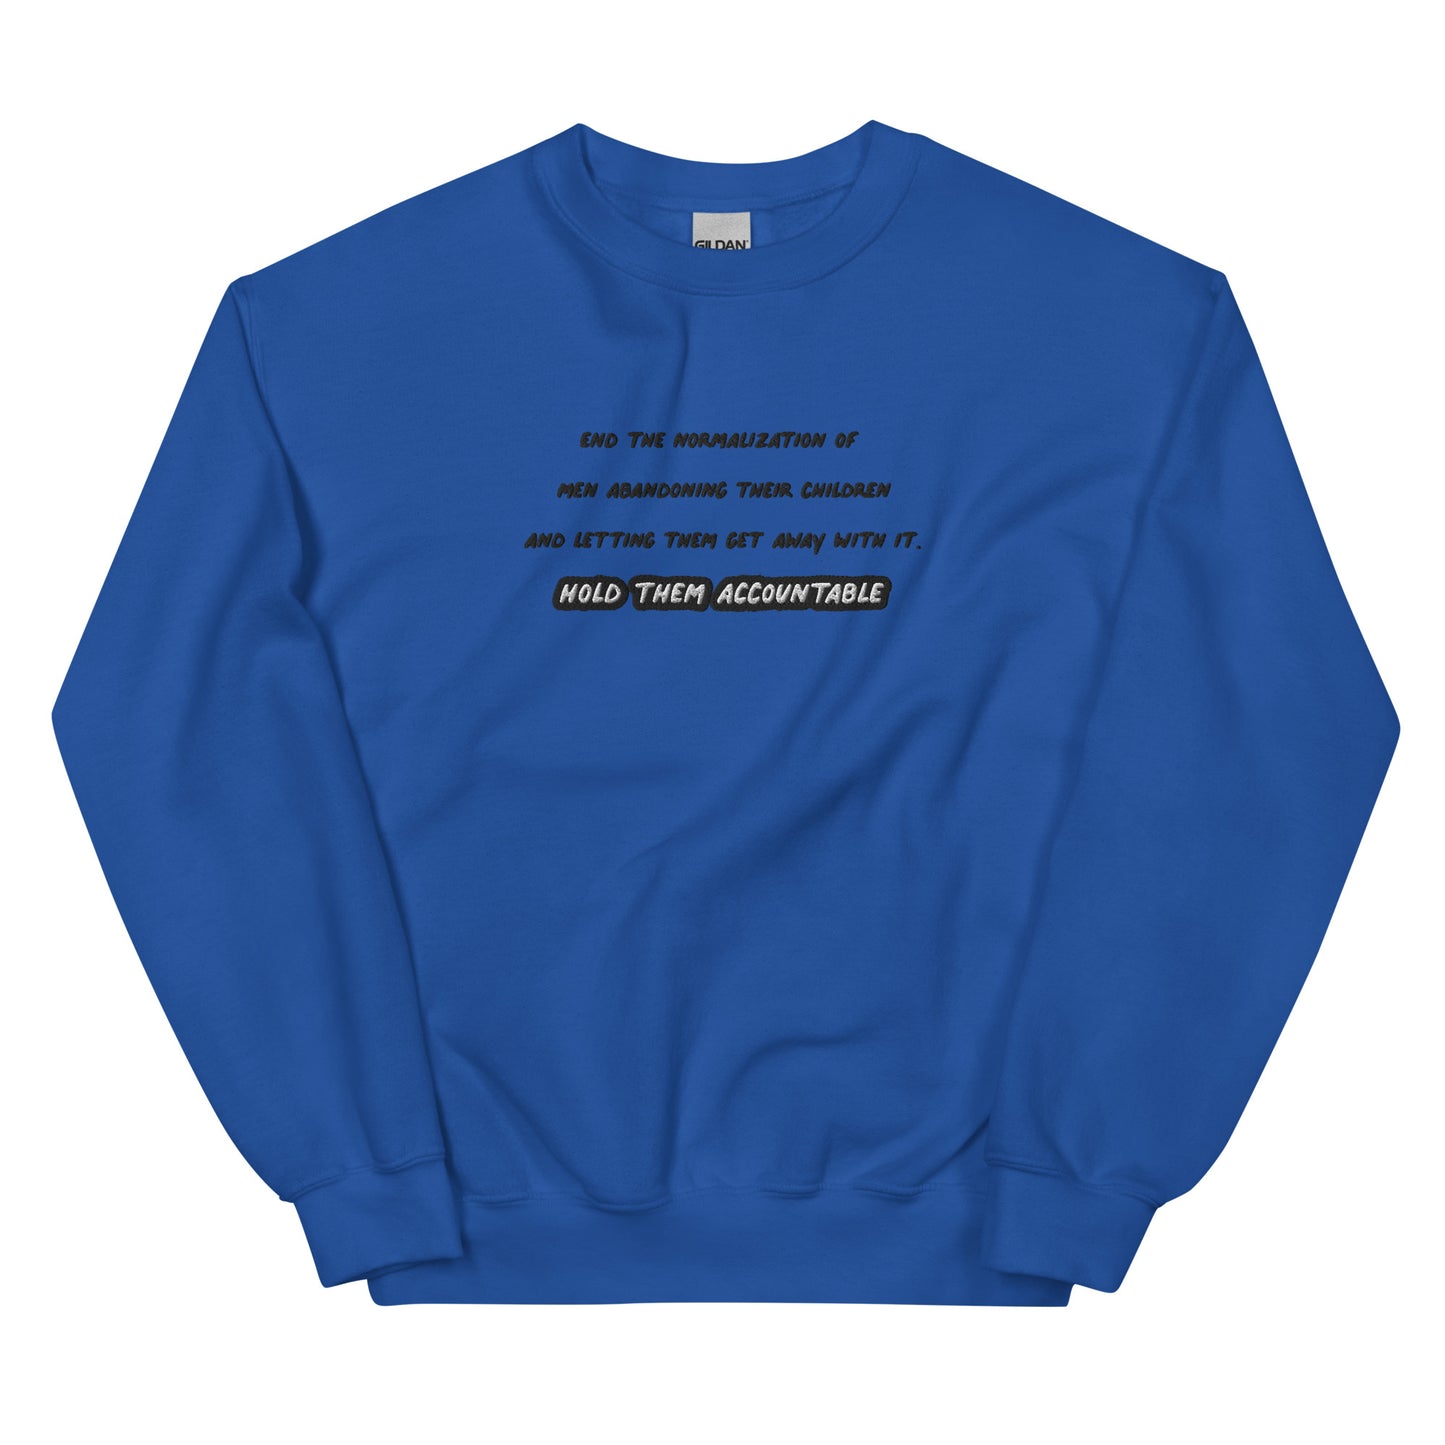 End The Normalization Of Men Abandoning Their Children Embroidered Unisex Sweatshirt